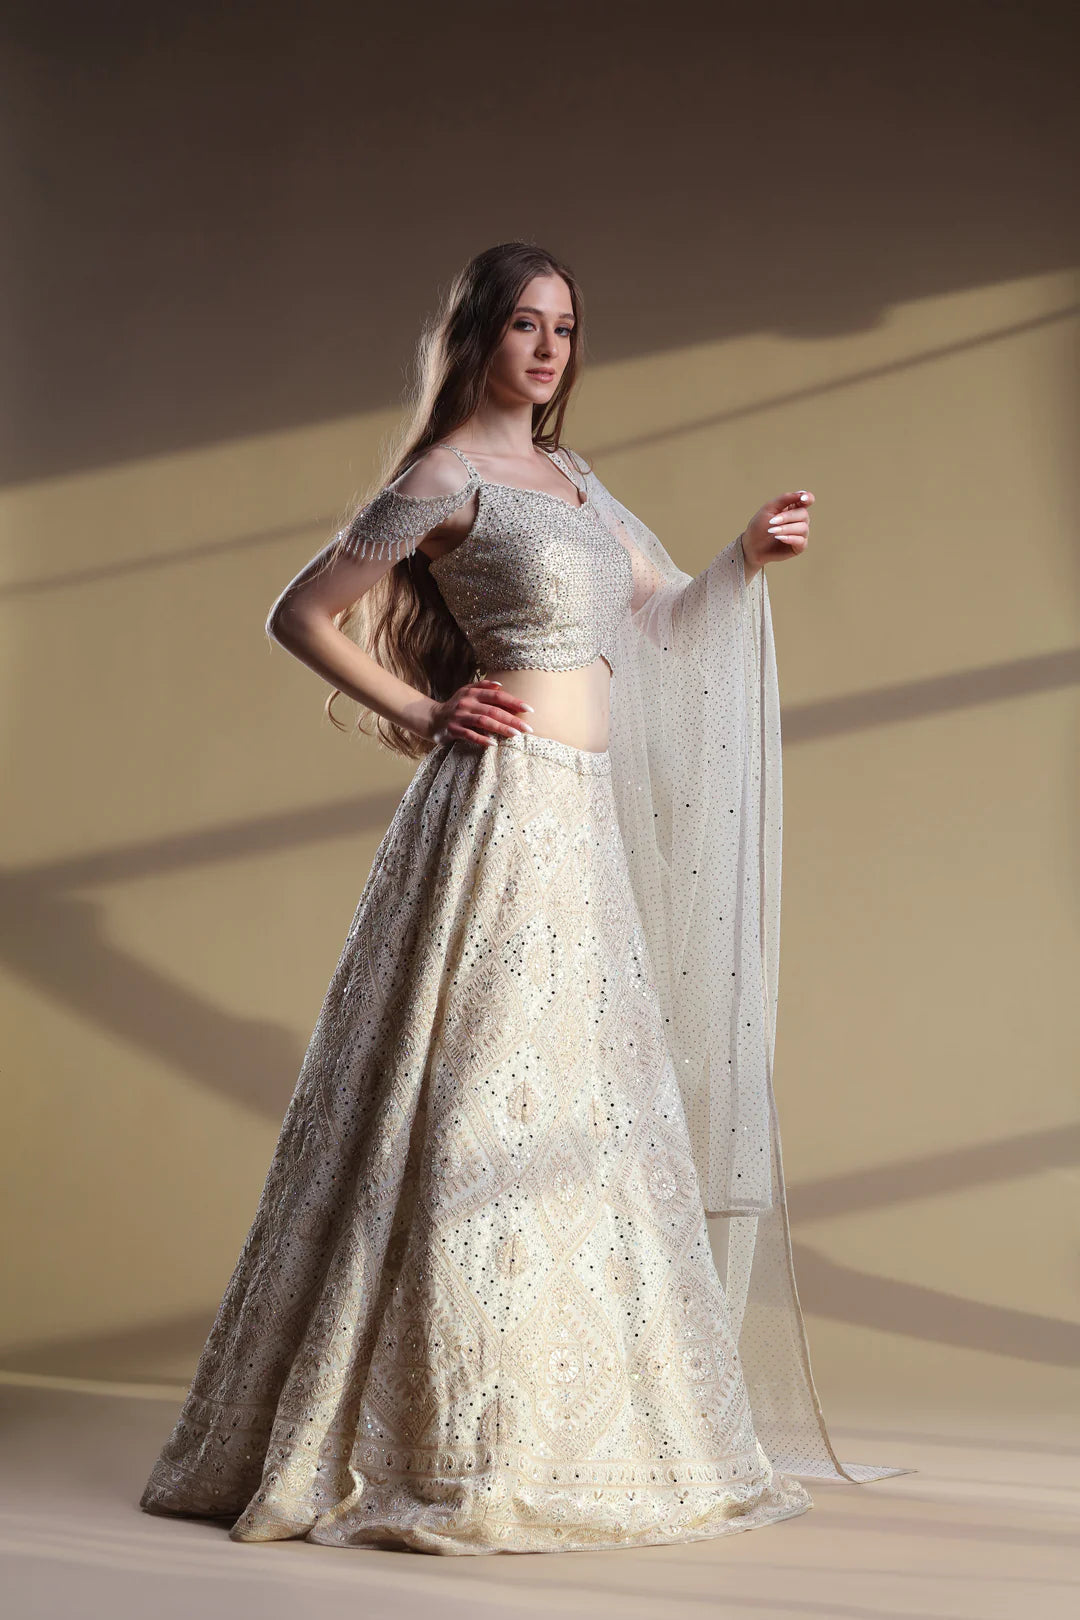 Model is wearing Best Snowy Lehenga And Silver Blouse.